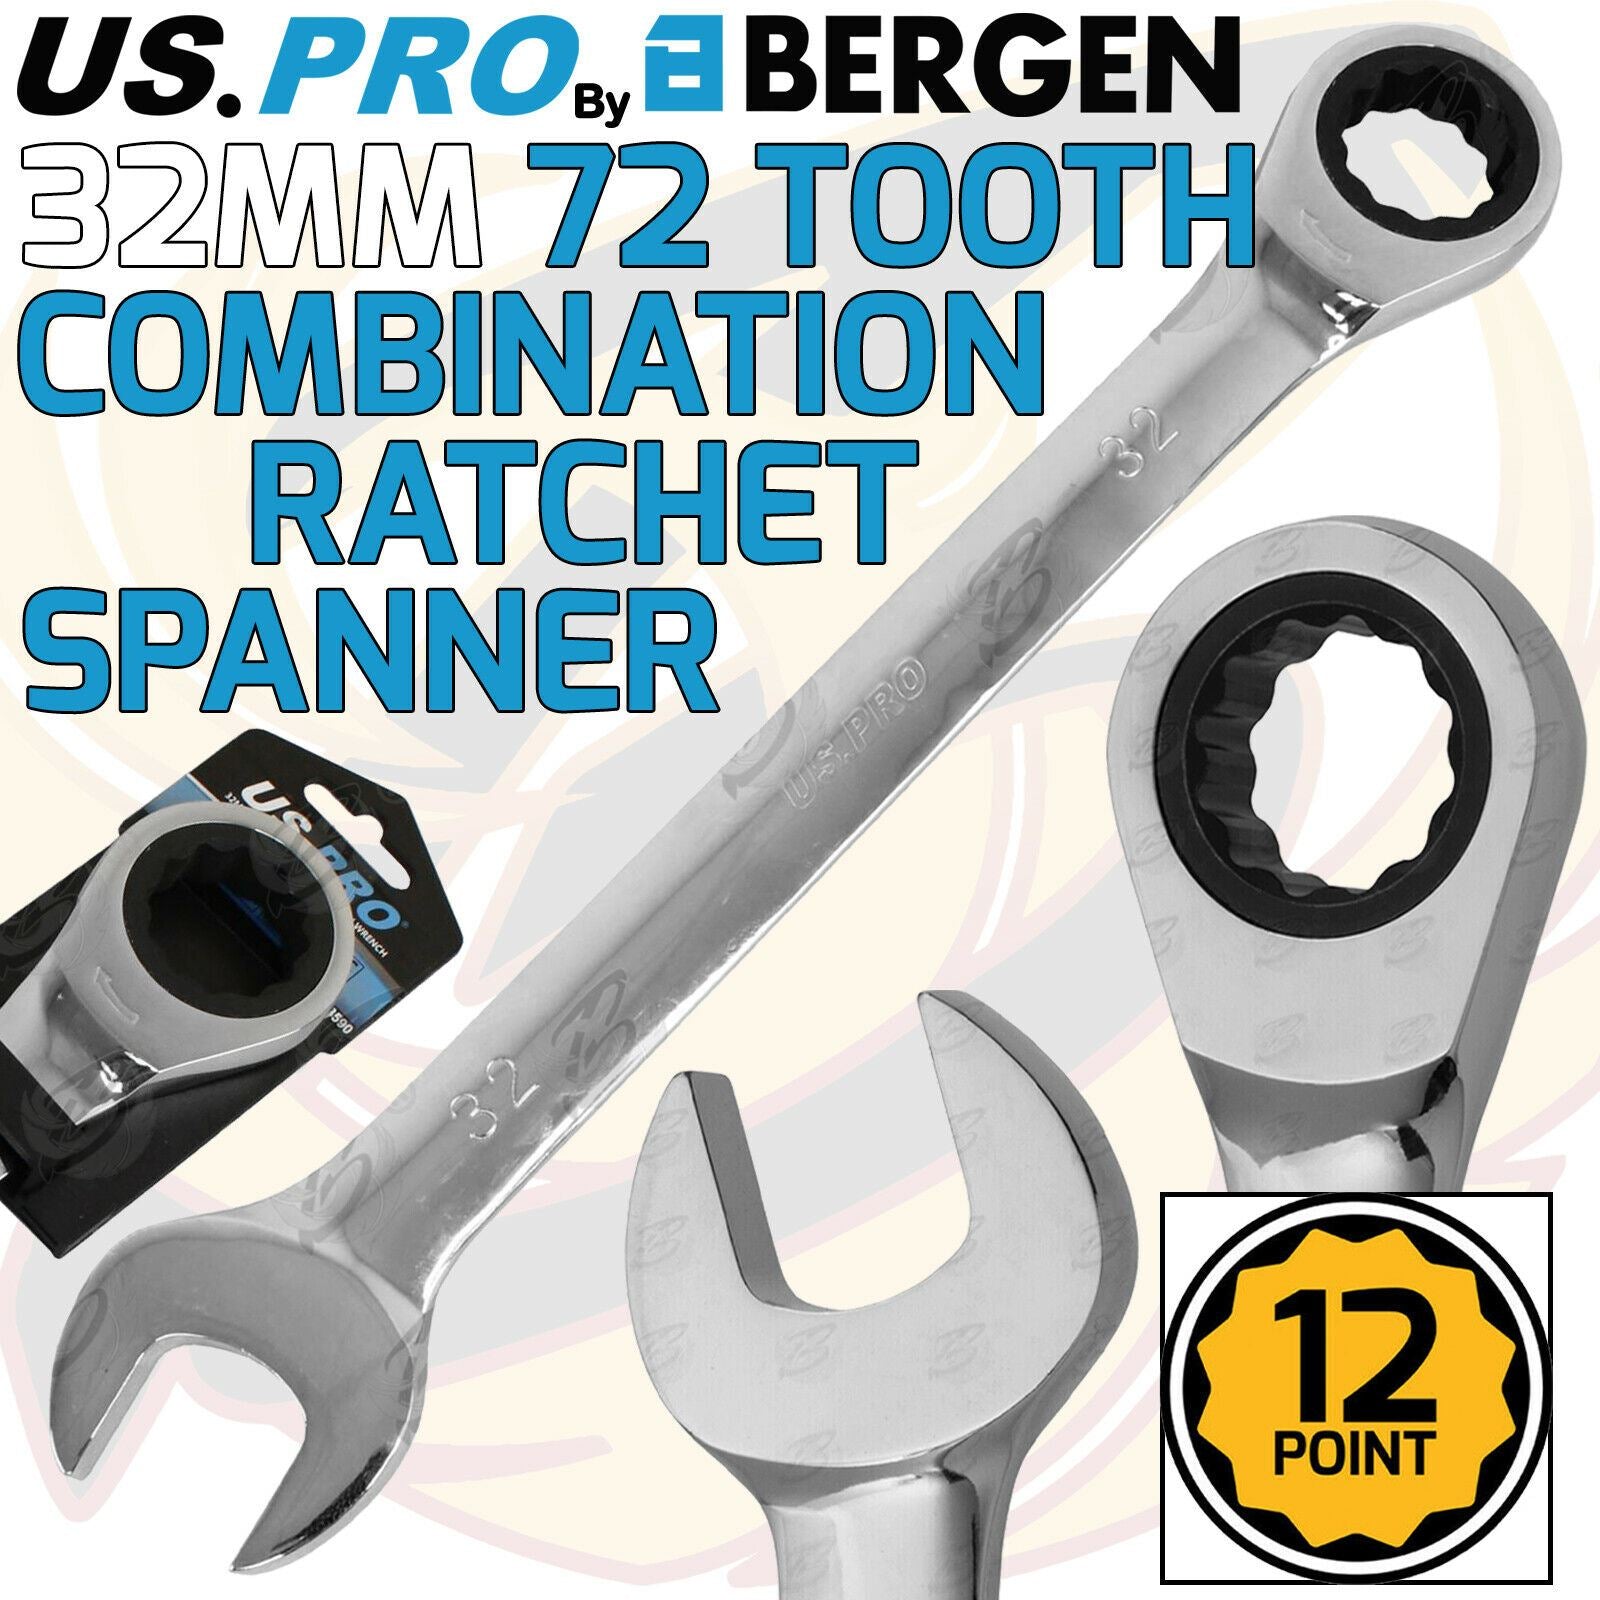 US PRO 32MM 72 TOOTH RATCHET SPANNER